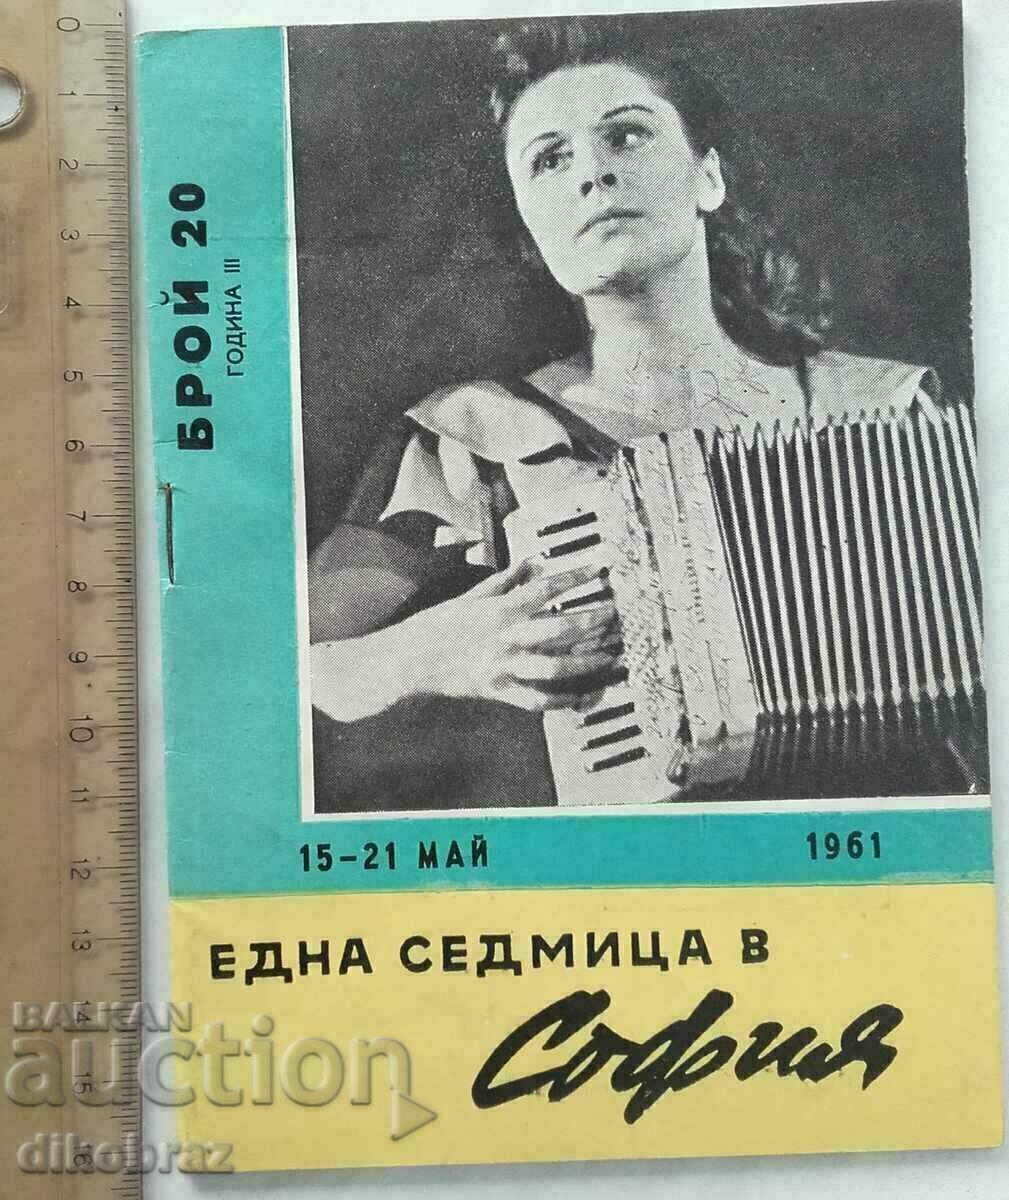 One week in Sofia - issue 20 / 1961 / for BGN